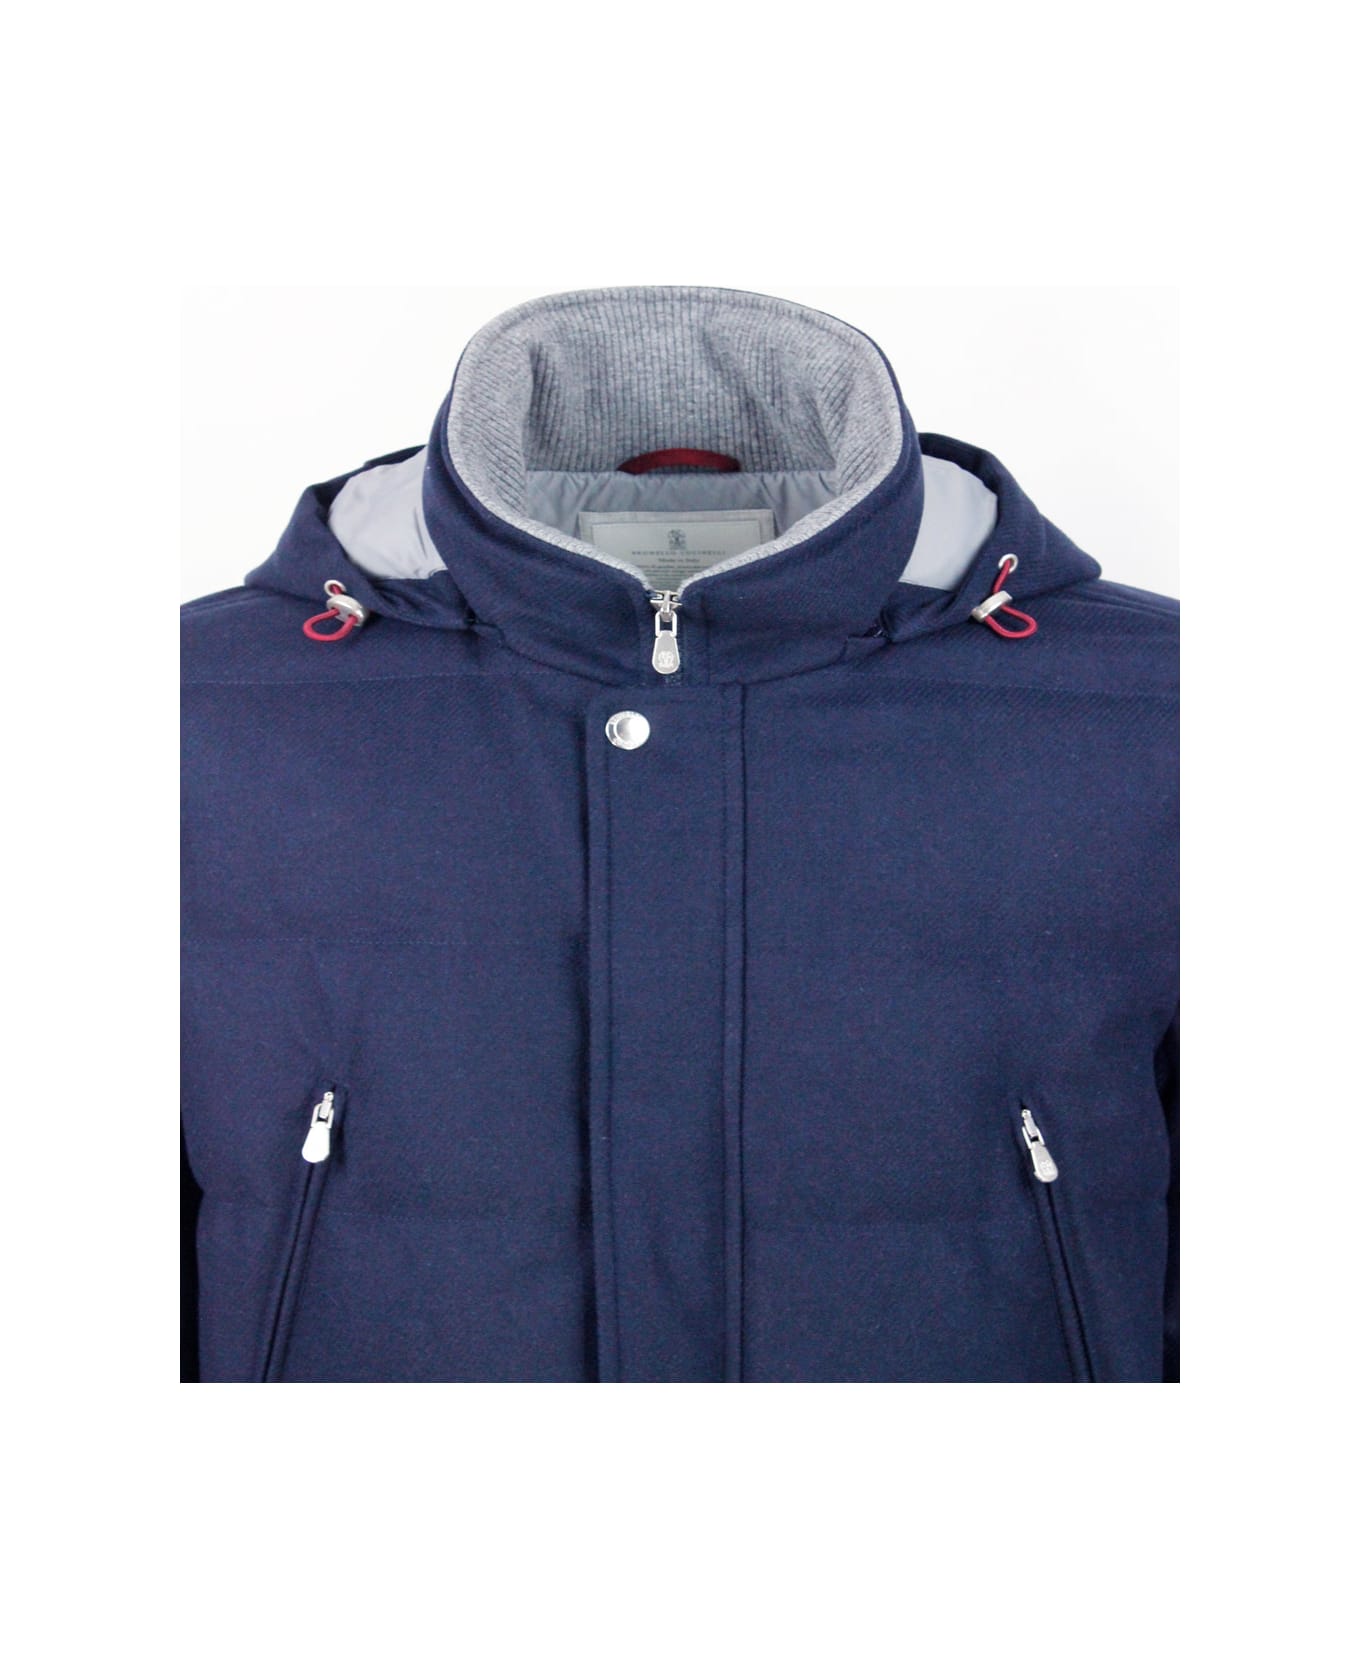 Brunello Cucinelli Down Jacket In Wool, Silk And Cashmere Padded With Fine Goose Down With Detachable Hood And Front Pockets - Blu